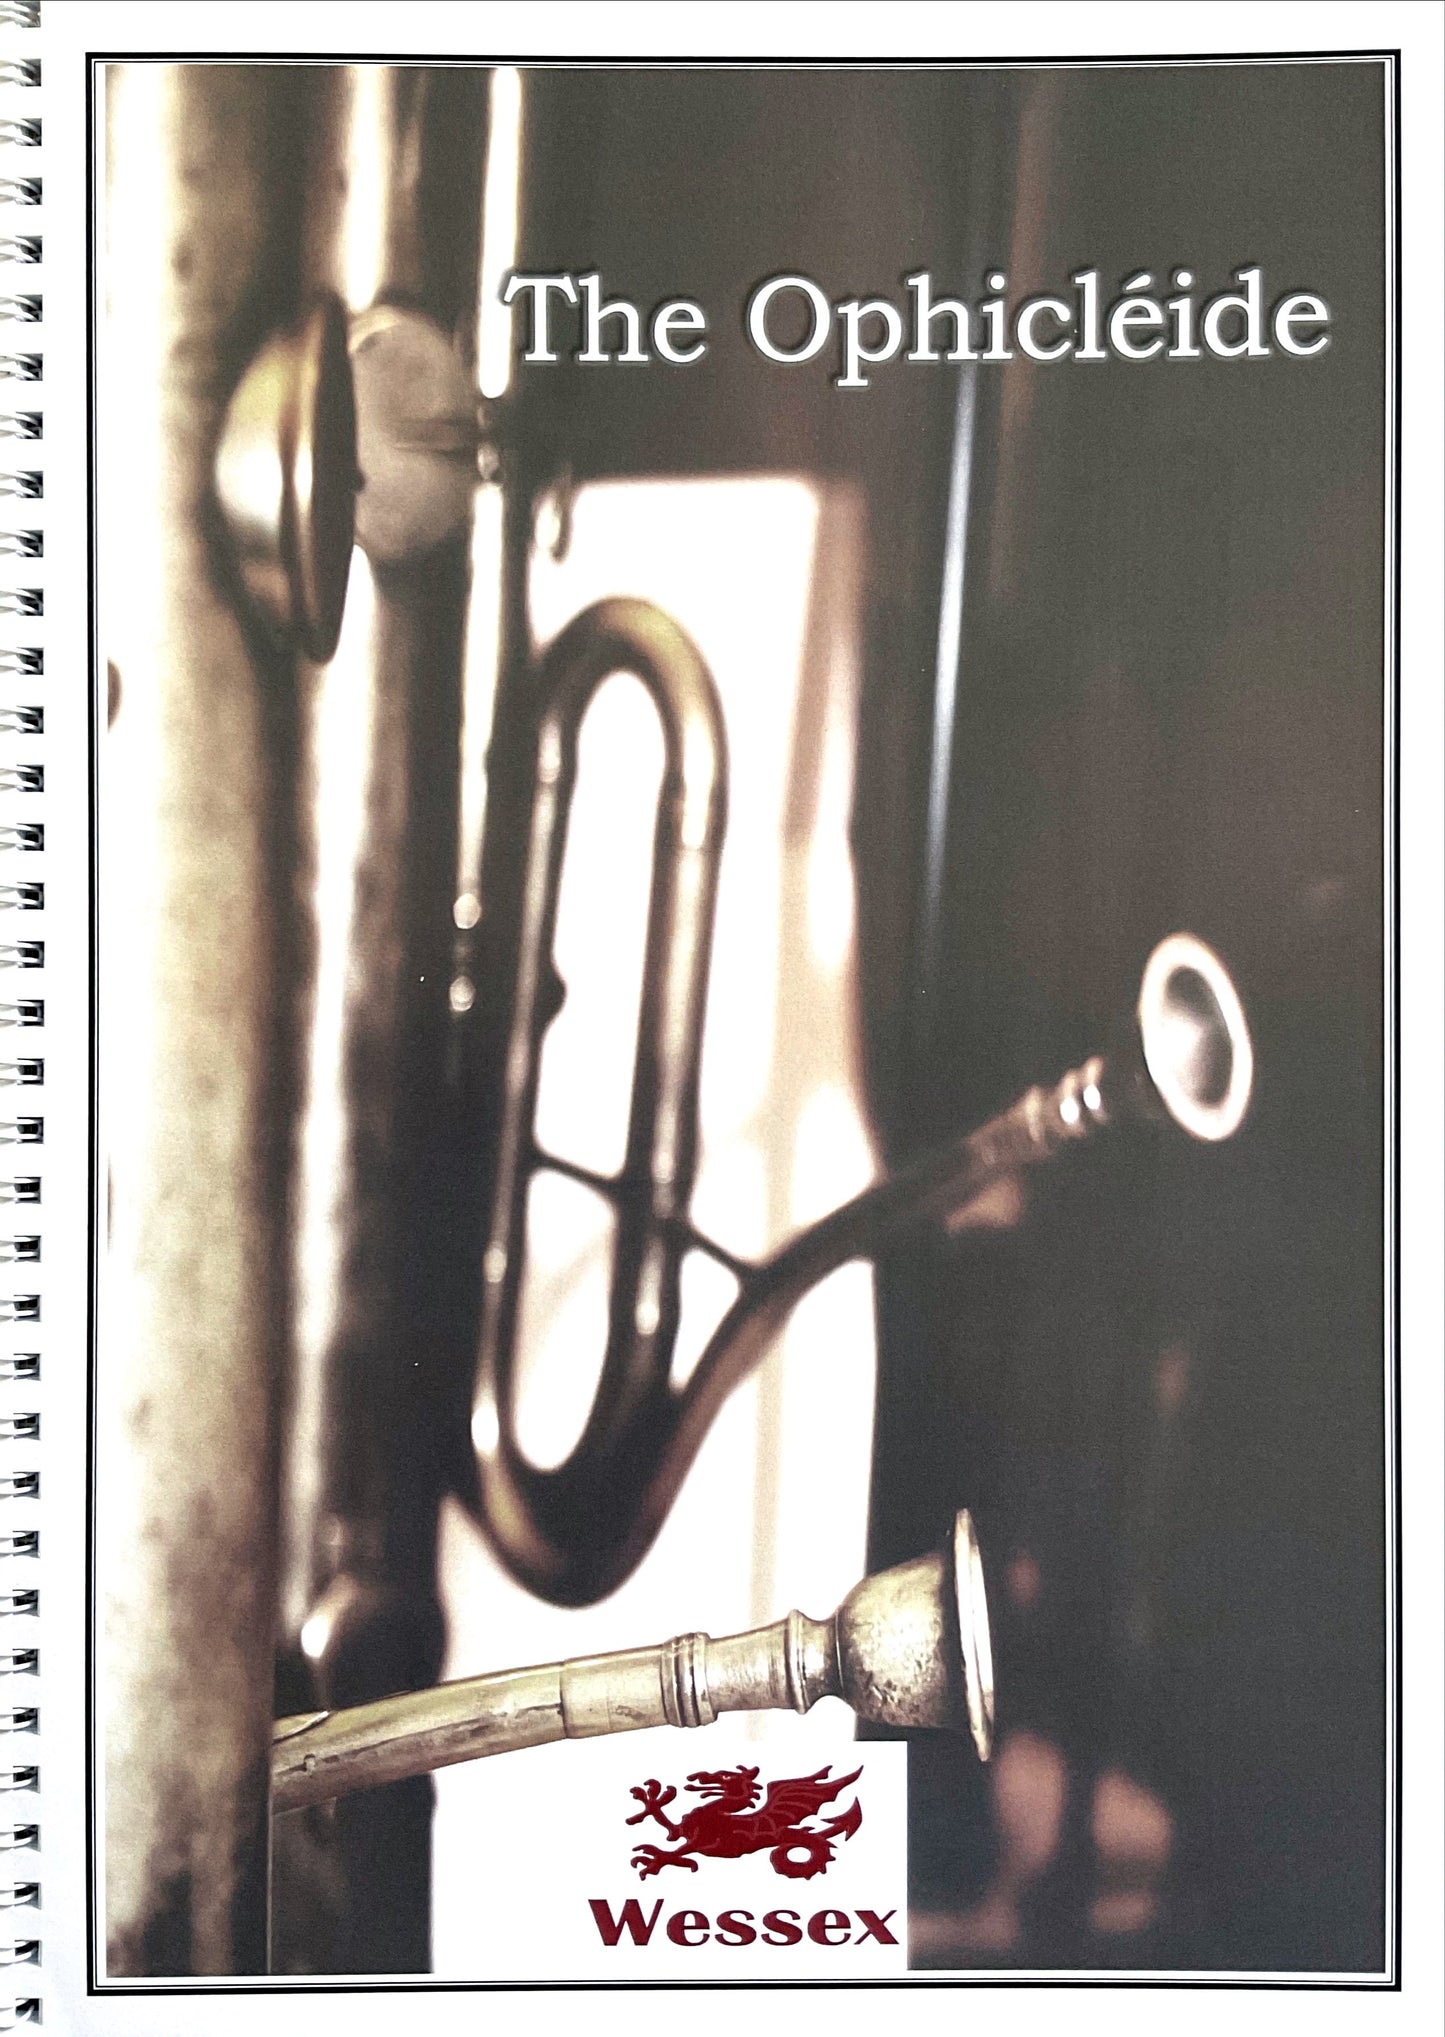 The Ophicleide - a study book by Tony George